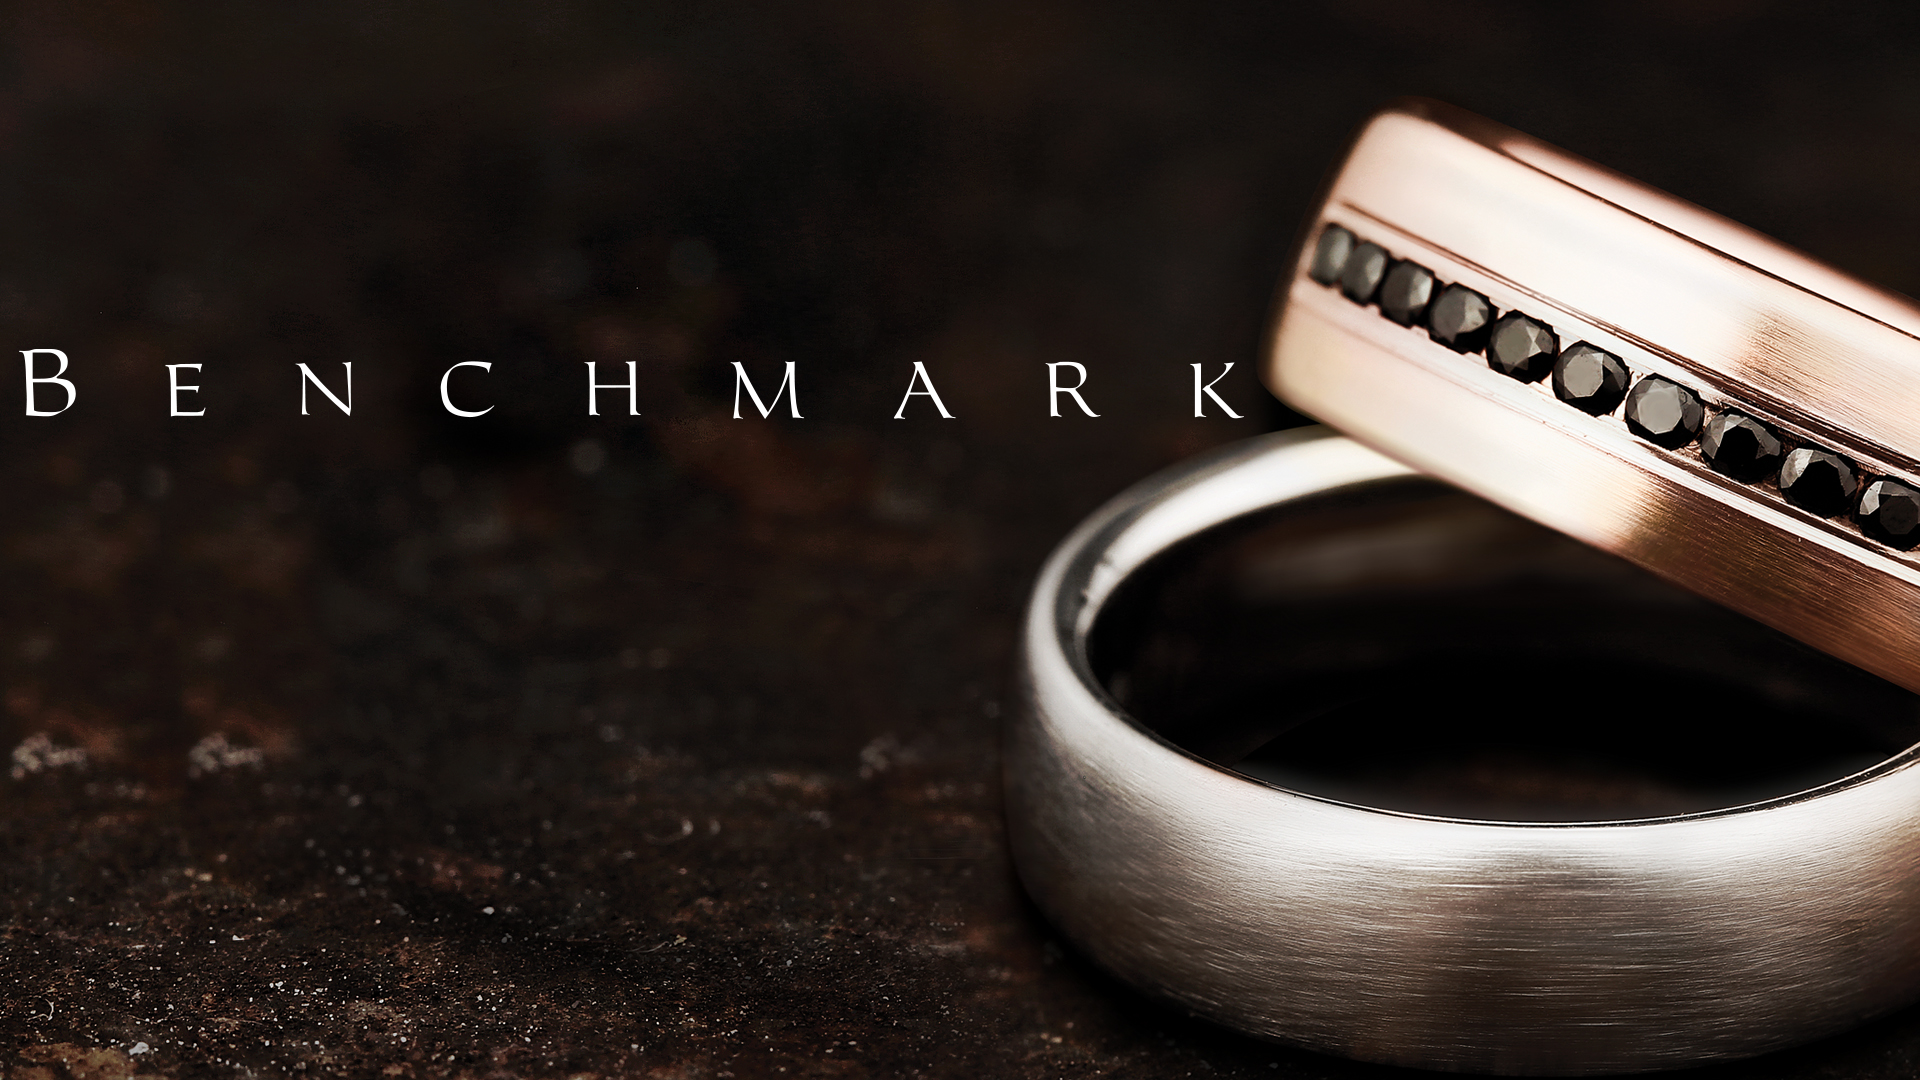 Benchmark, Jewelry, Rings, Fine Jewelry, Jewelry Stores, Geiss and Sons, Greenville, South Carolina